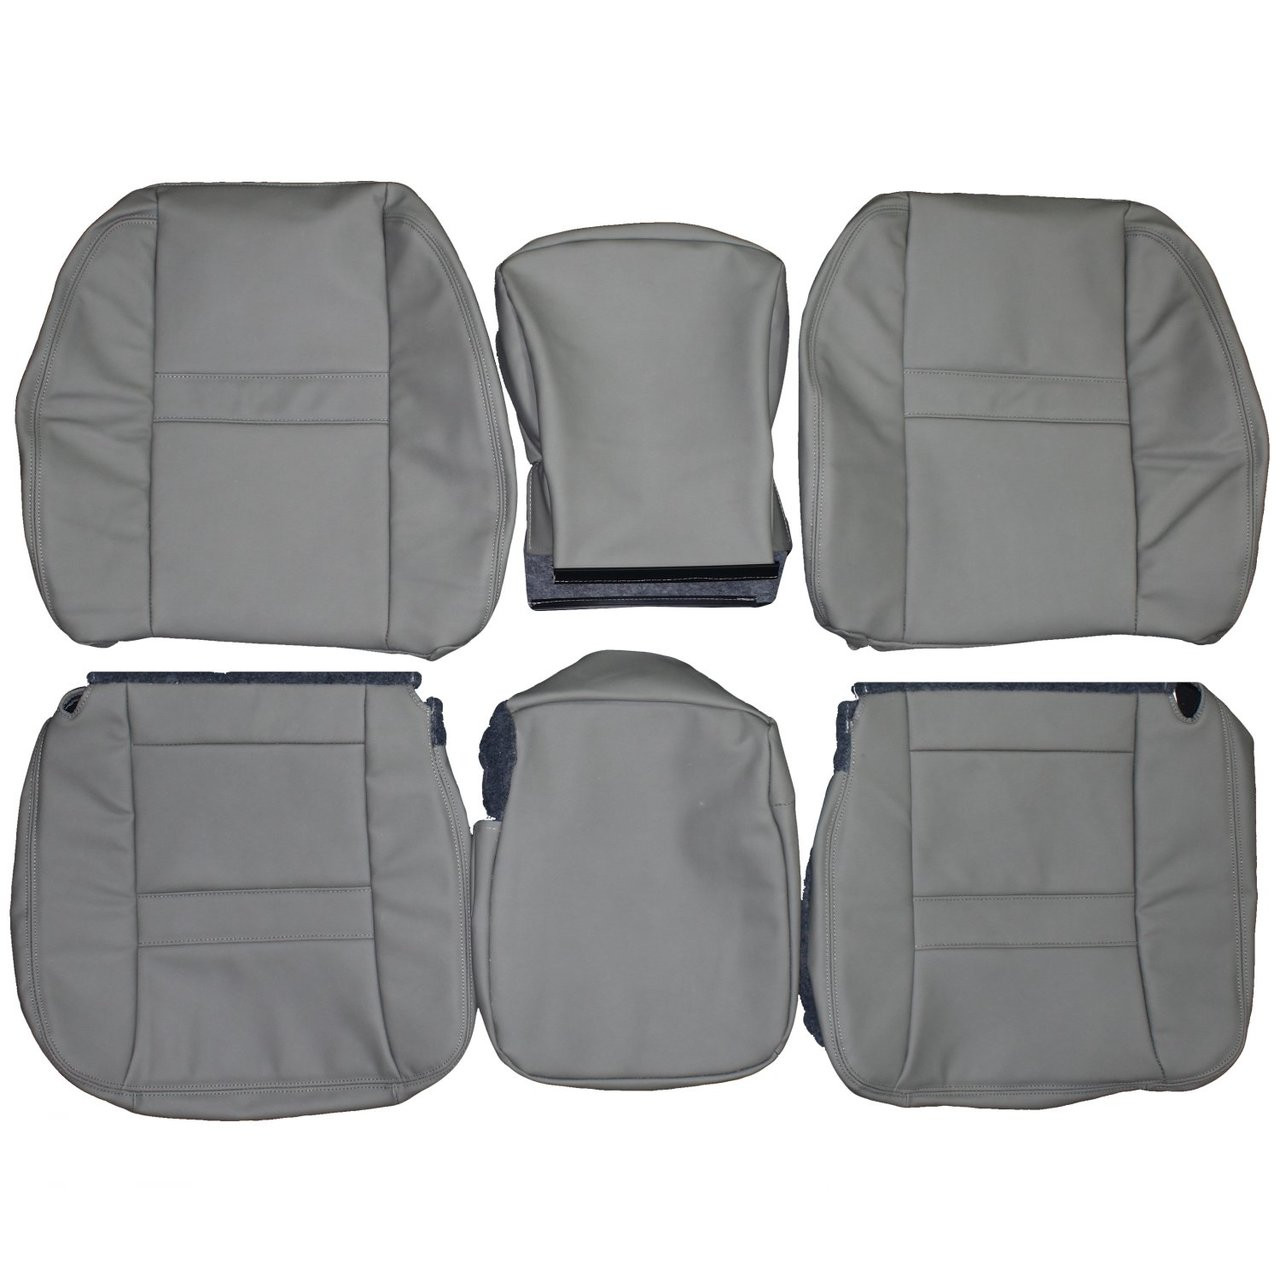 2006-2009 Dodge Ram 2500 Custom Real Leather Seat Covers (Front) - Lseat.com